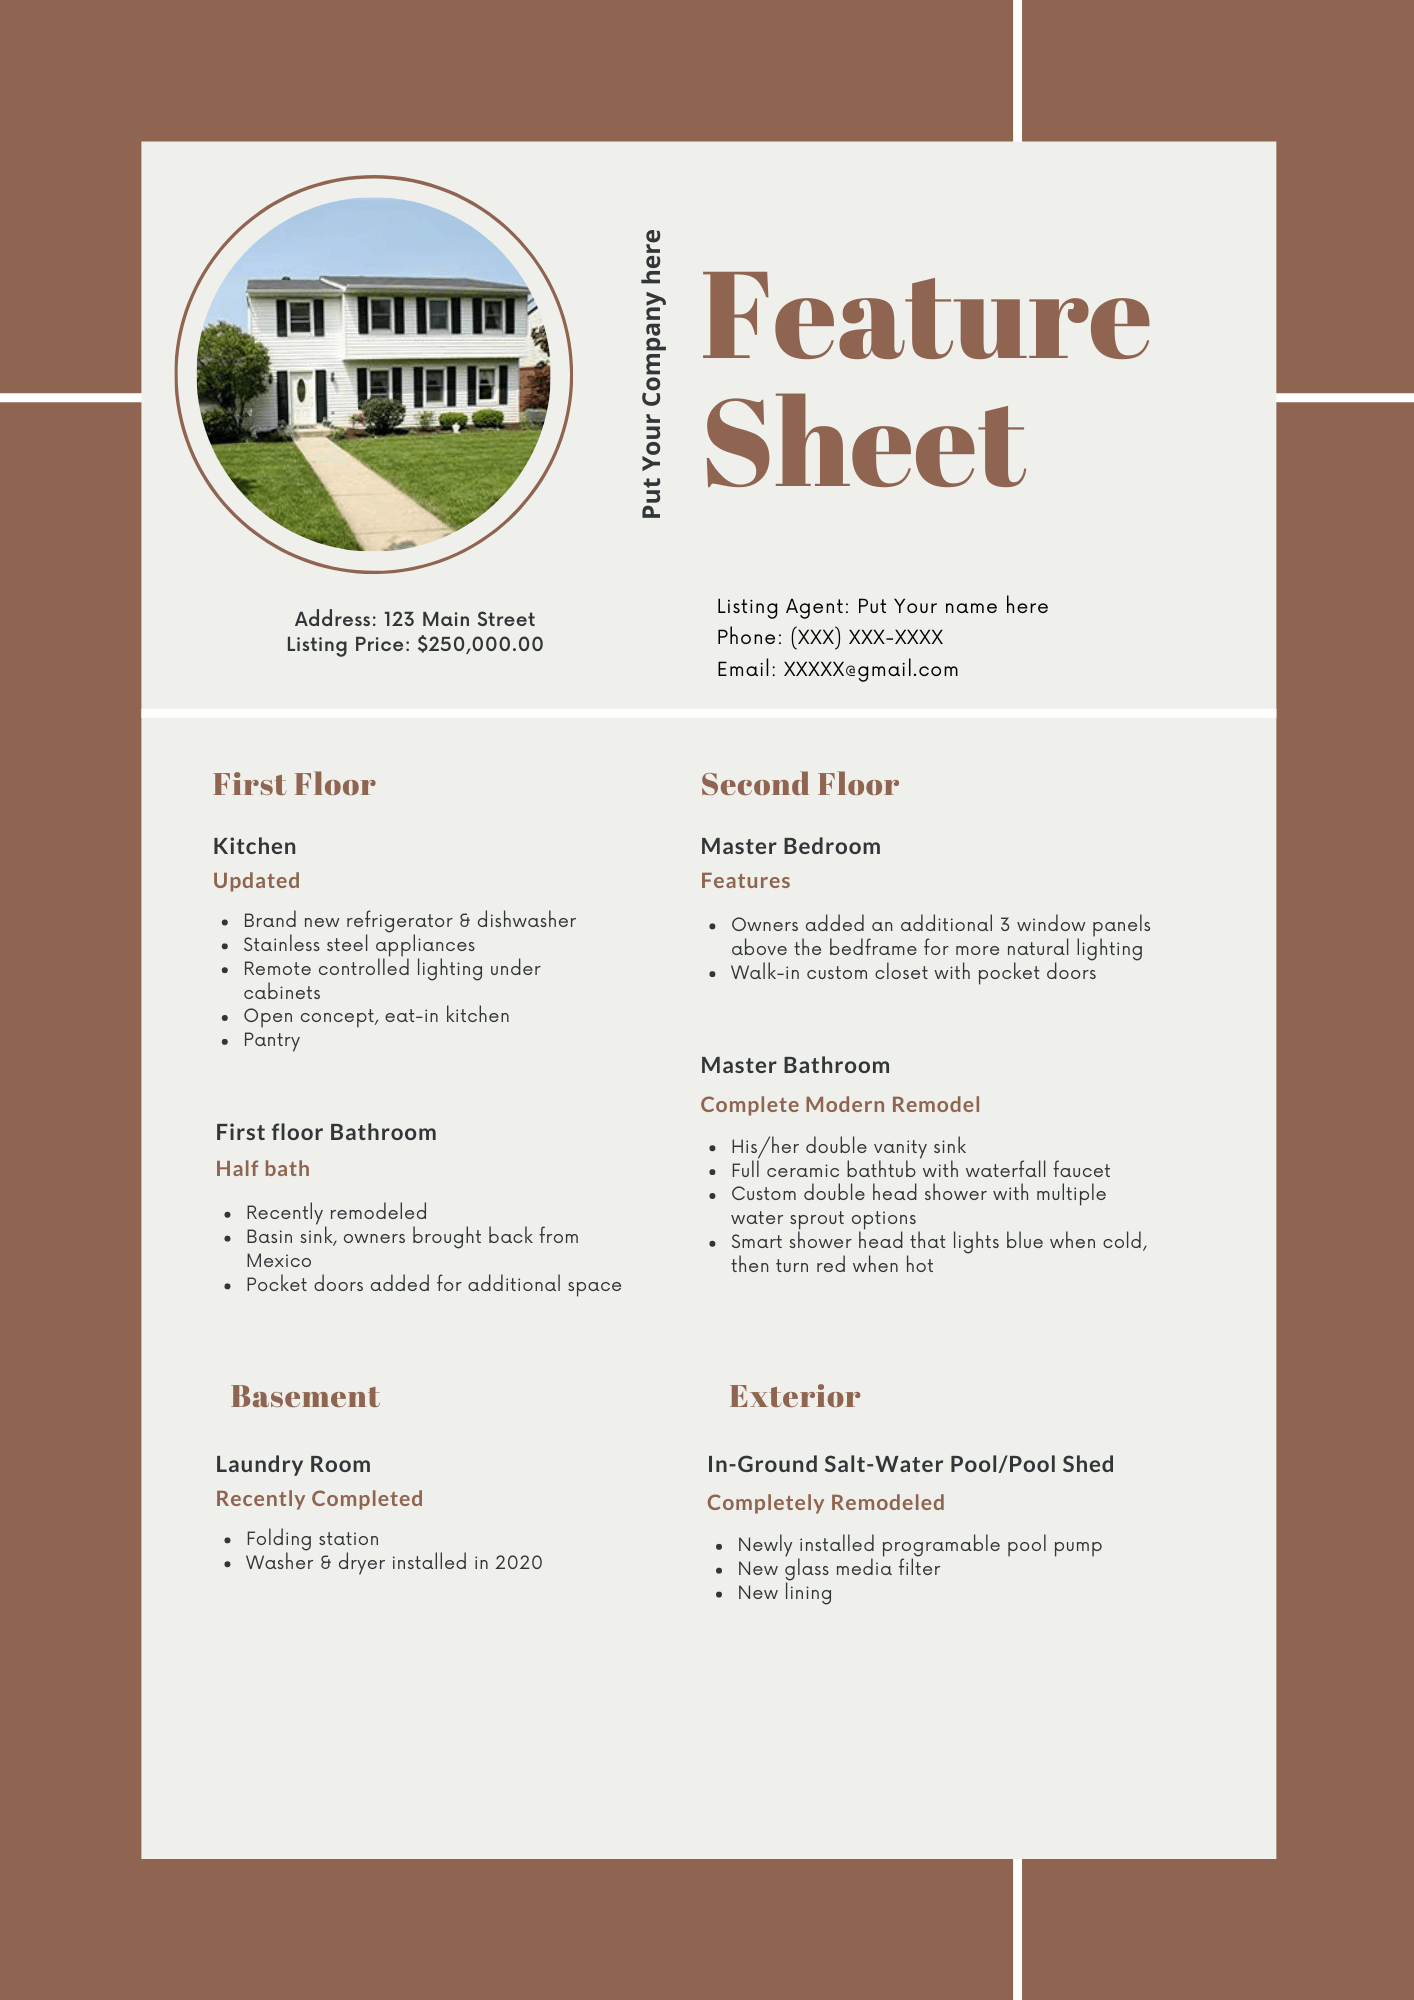 example of a real estate feature sheet